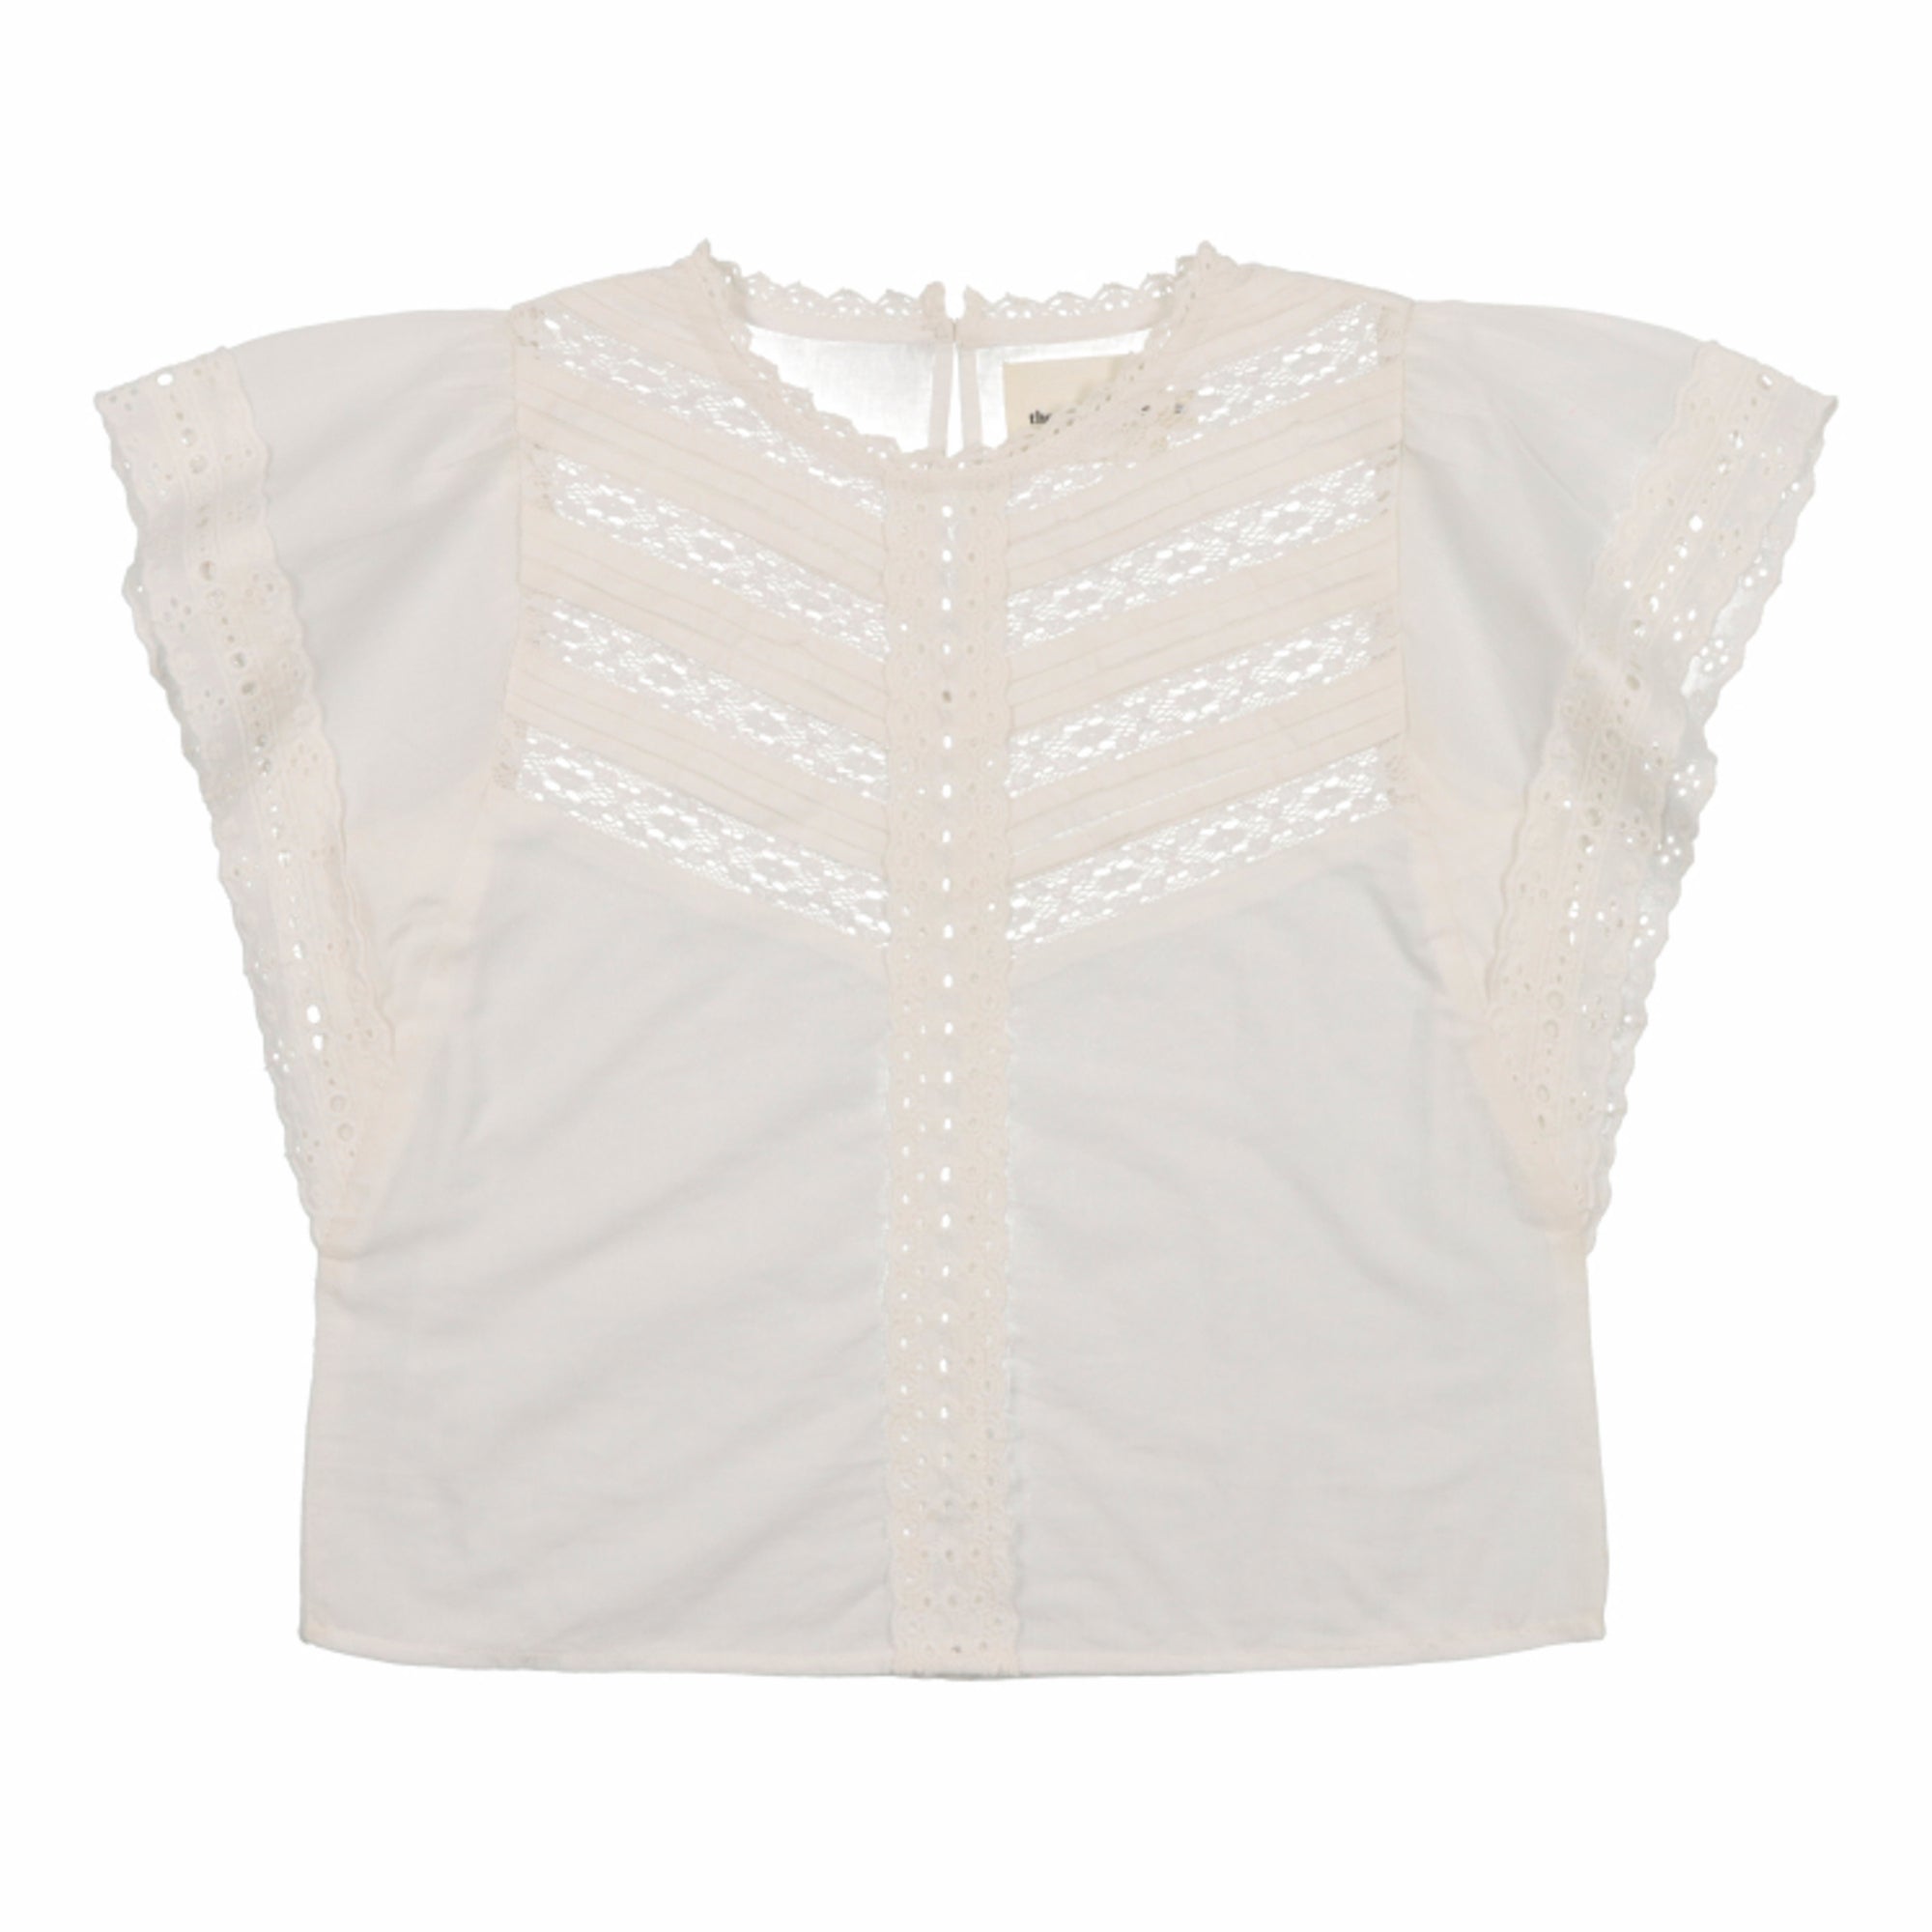 Girls White Lace Cotton Top